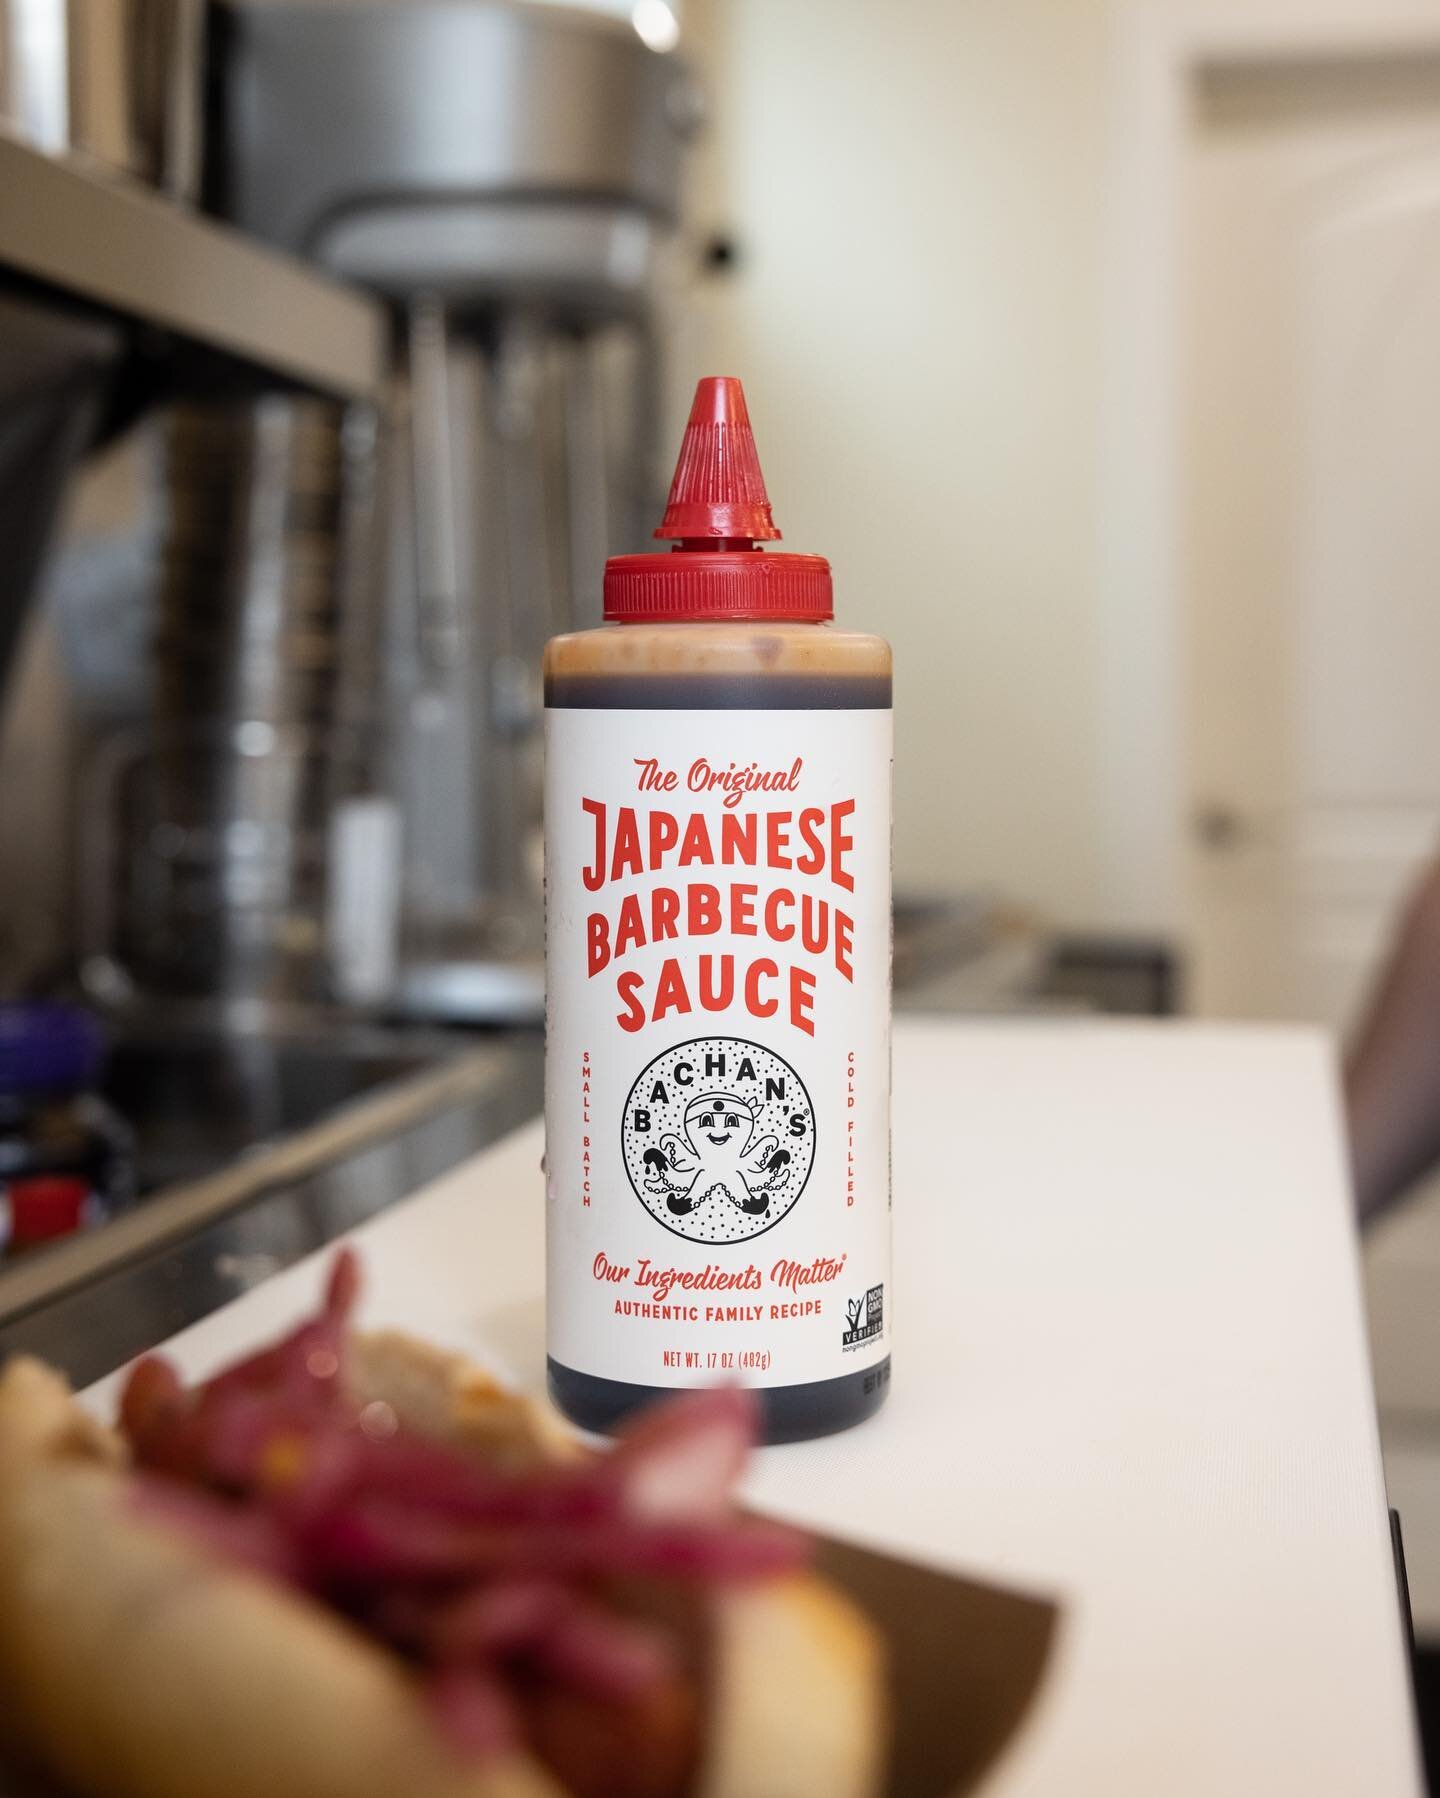 Warm up the day with THE INU. Delicious dog sporting @trybachans Japanese BBQ sauce.